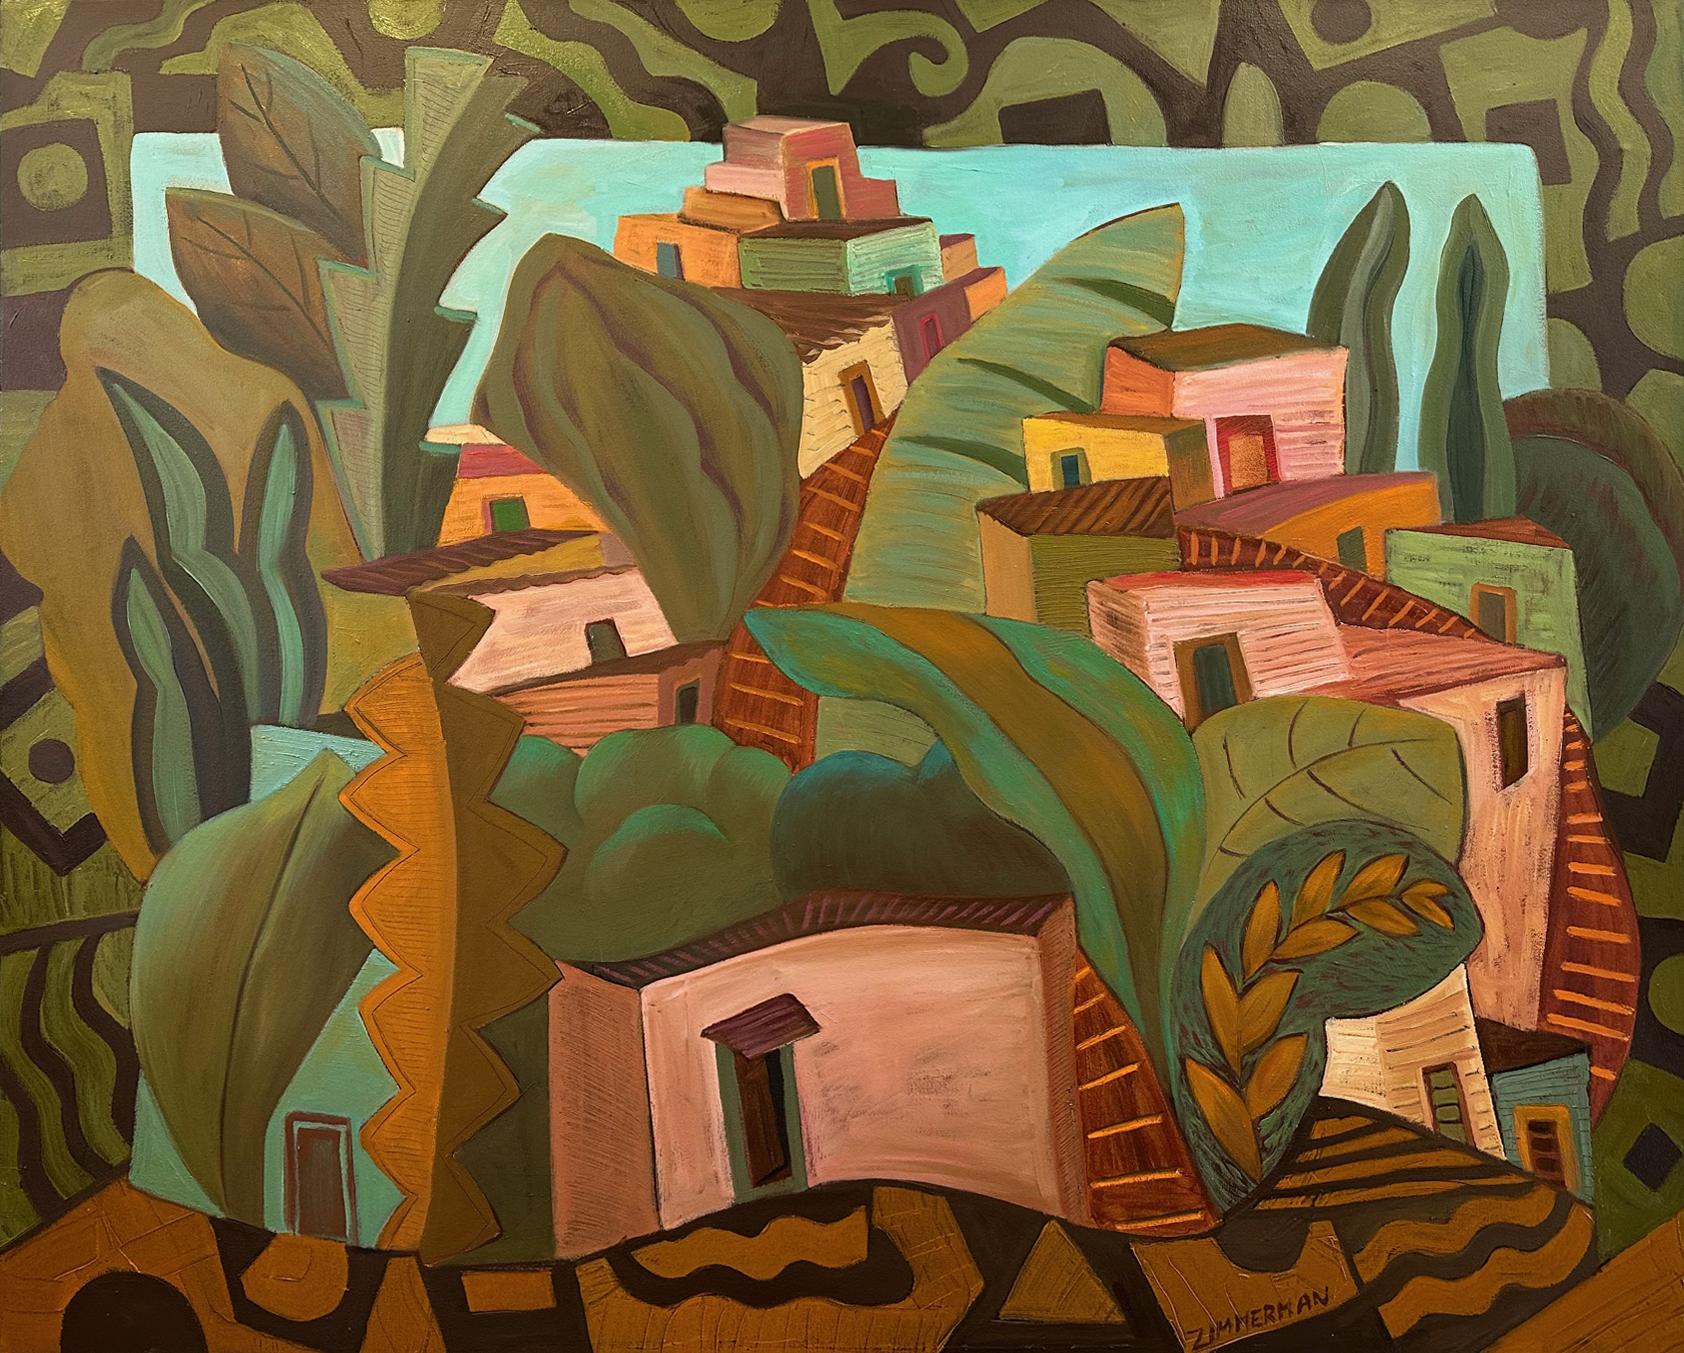 Villa Nova - Abstraction Urbanscape by Marc Zimmerman


Marc Zimmerman creates playful paintings, whether deep mysterious jungle or delightfully whimsical florals. His color palette explores various harmonies yet always surprises with new color